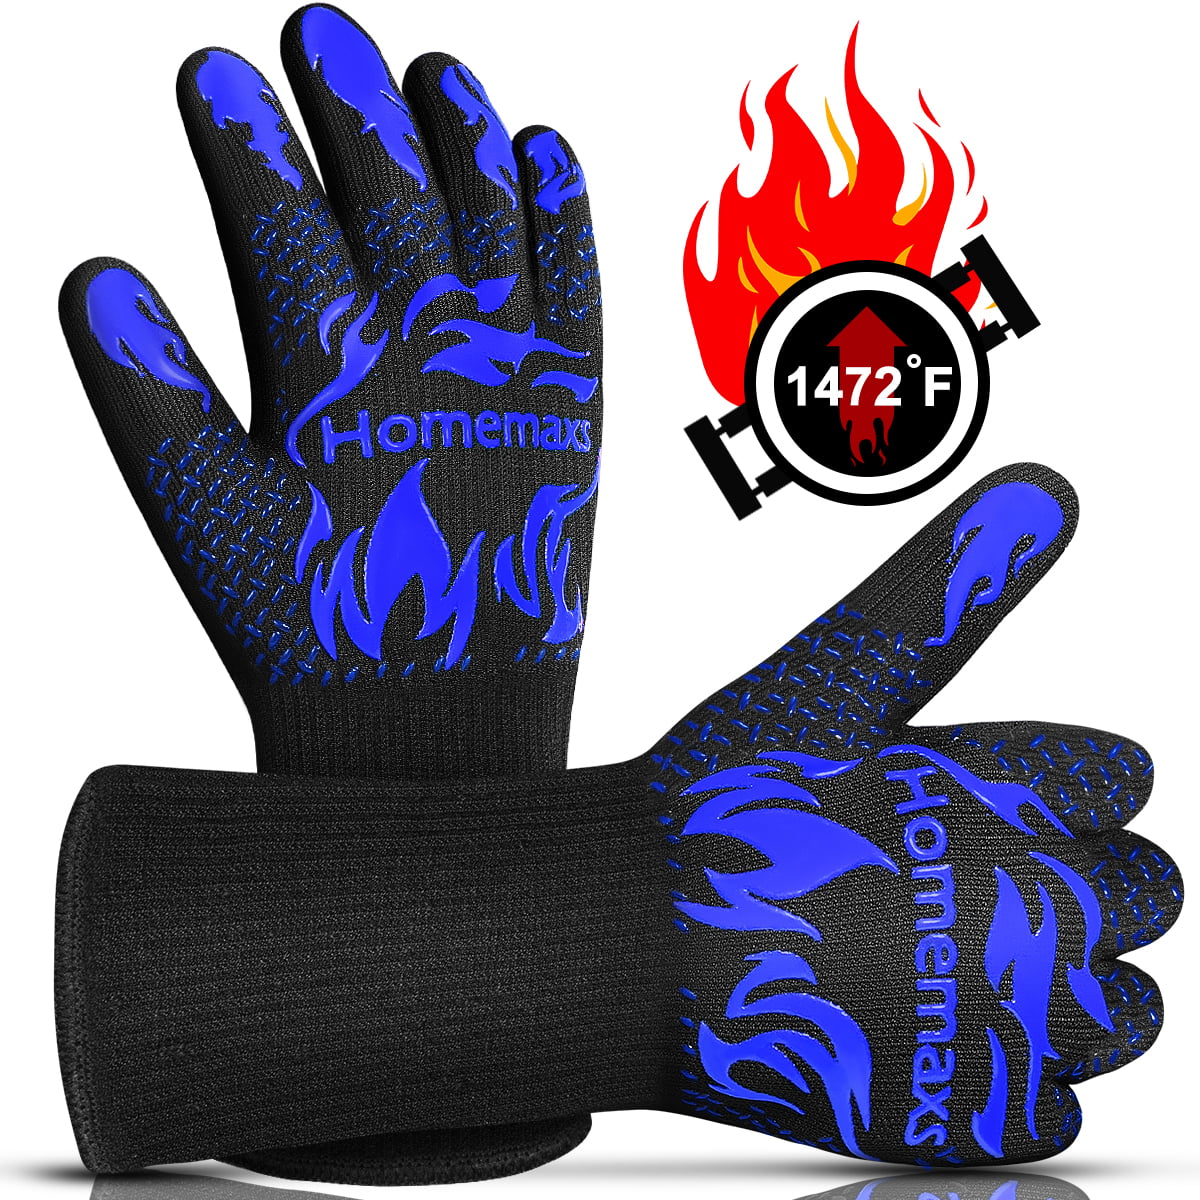 Baking Heat Resistant Gloves for BBQ 2-Gloves Included Grilling Oven Gloves Hungry Hands BBQ Gloves Cutting Resistant Up to 1472℉ 